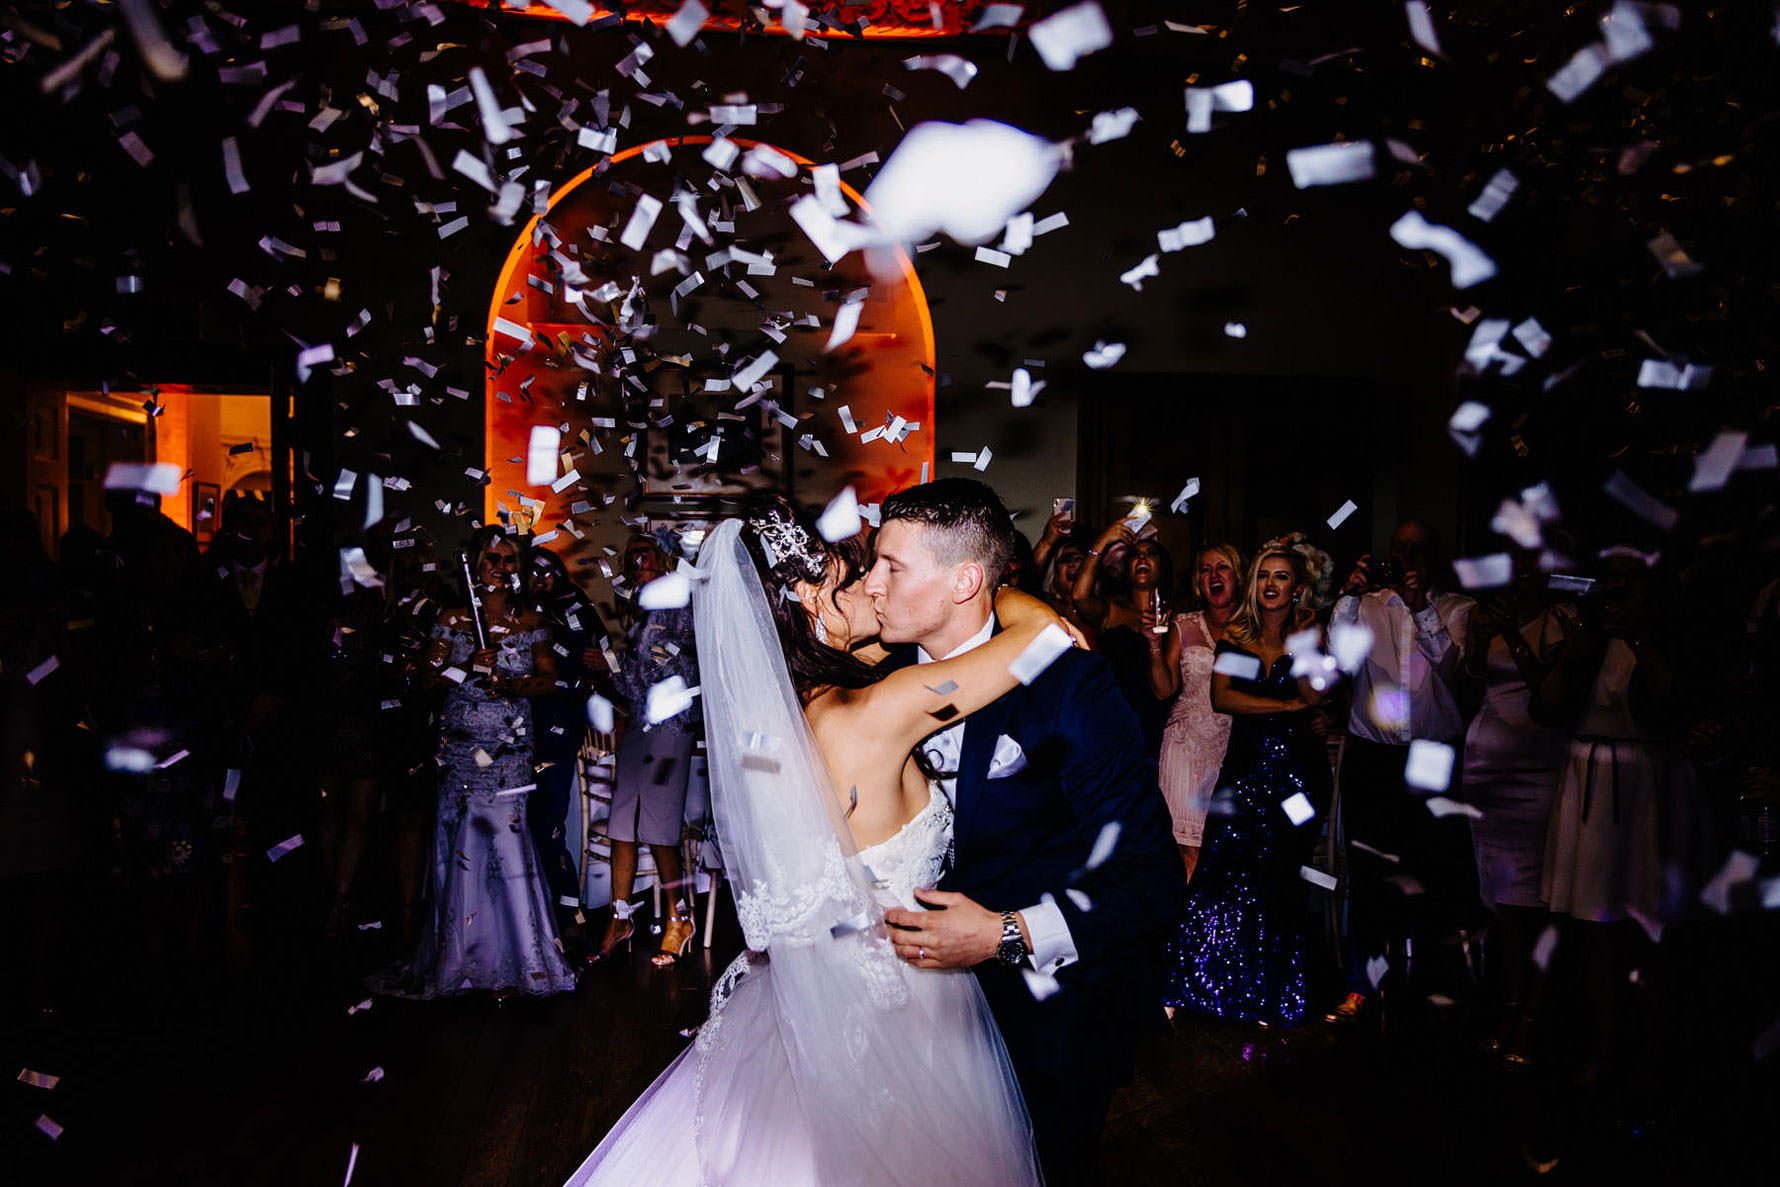 confetti canon during a first dance